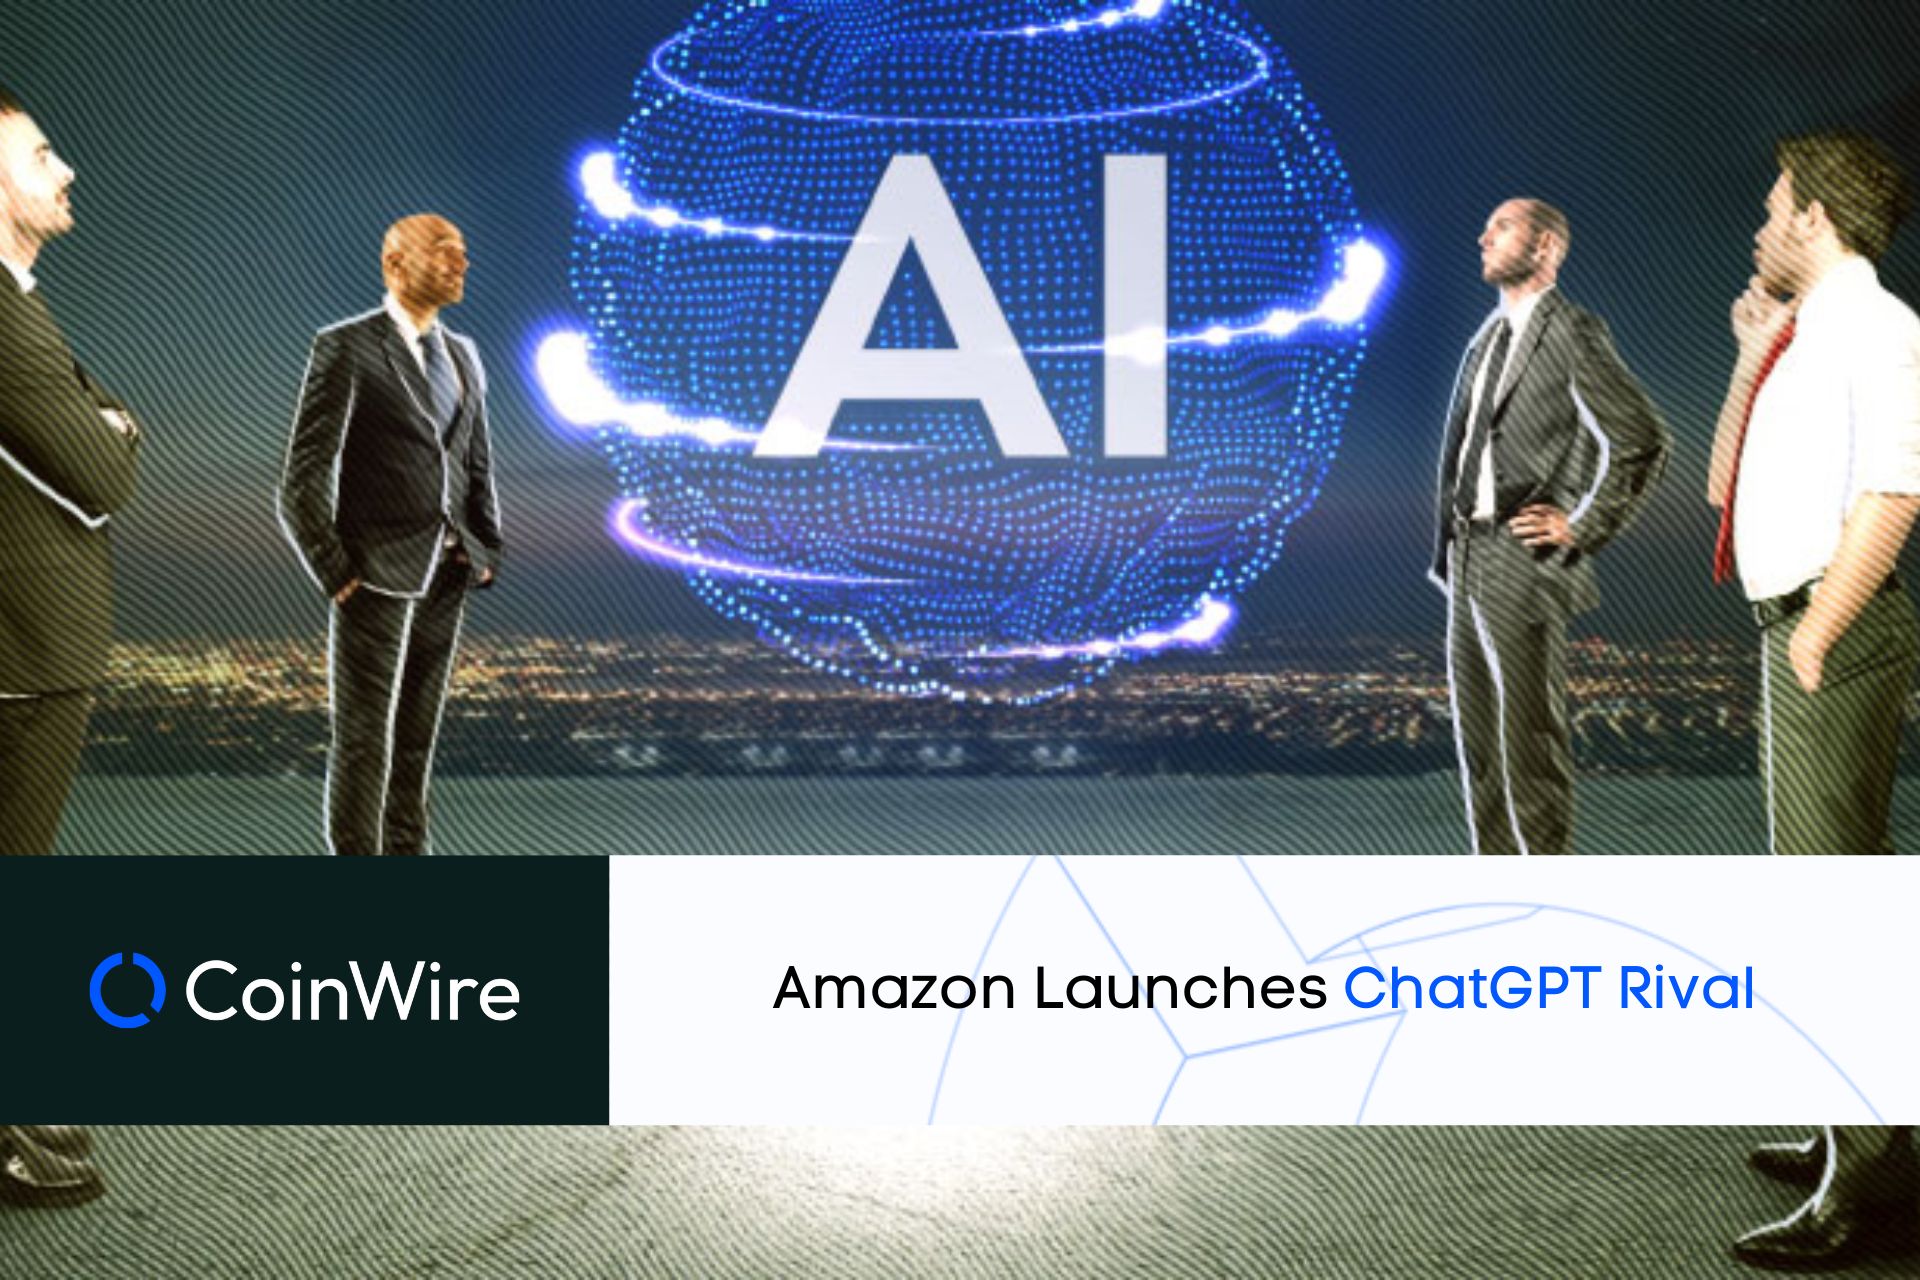 Amazon Launches Chatgpt Rival